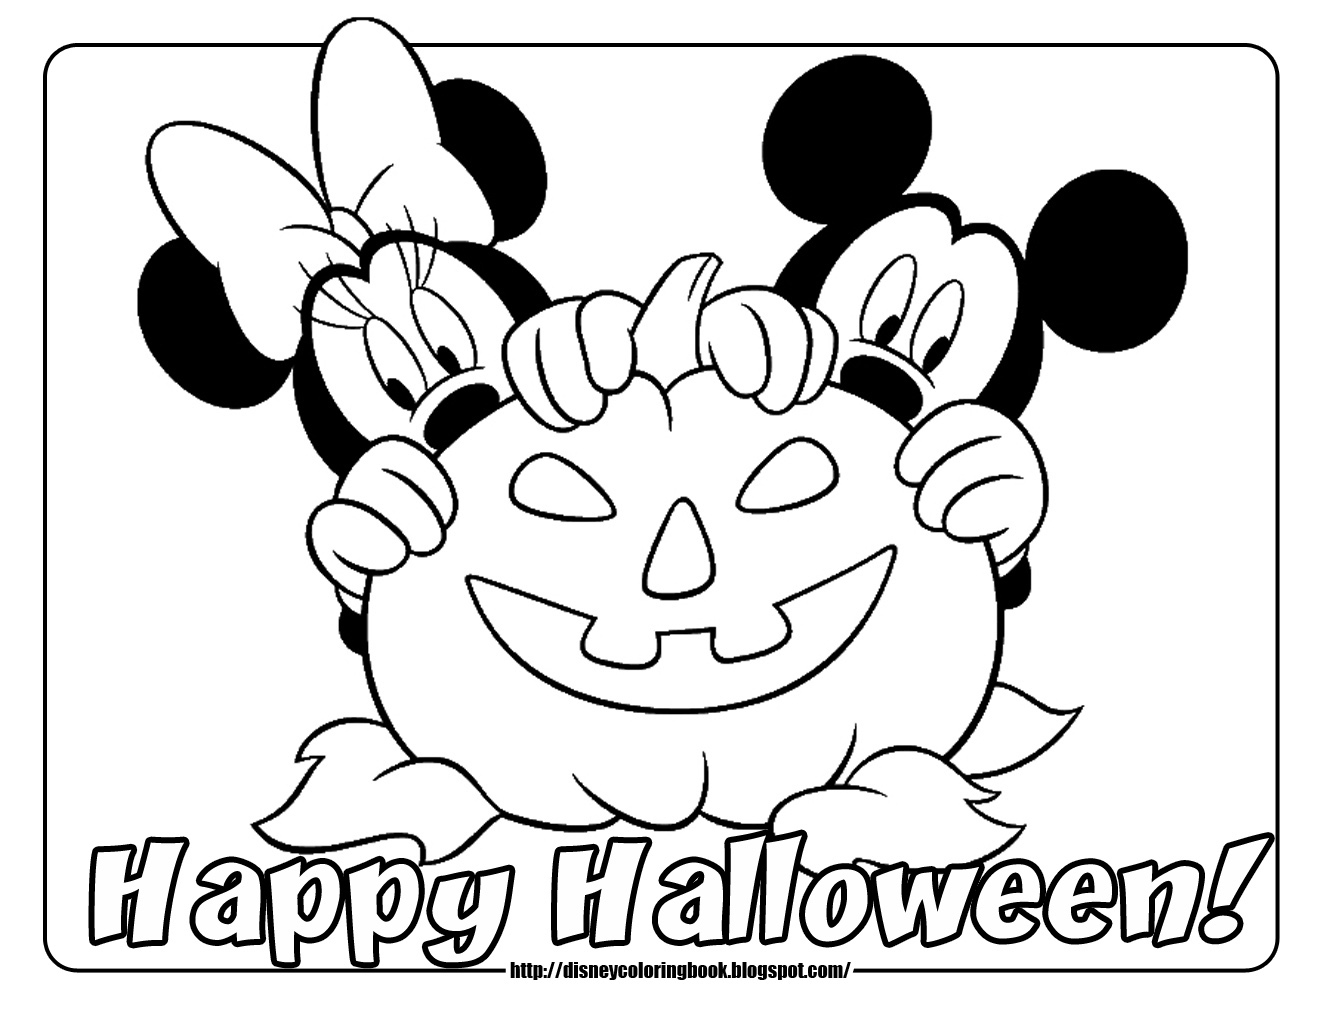 Free Disney Halloween Coloring Pages For Kids 7